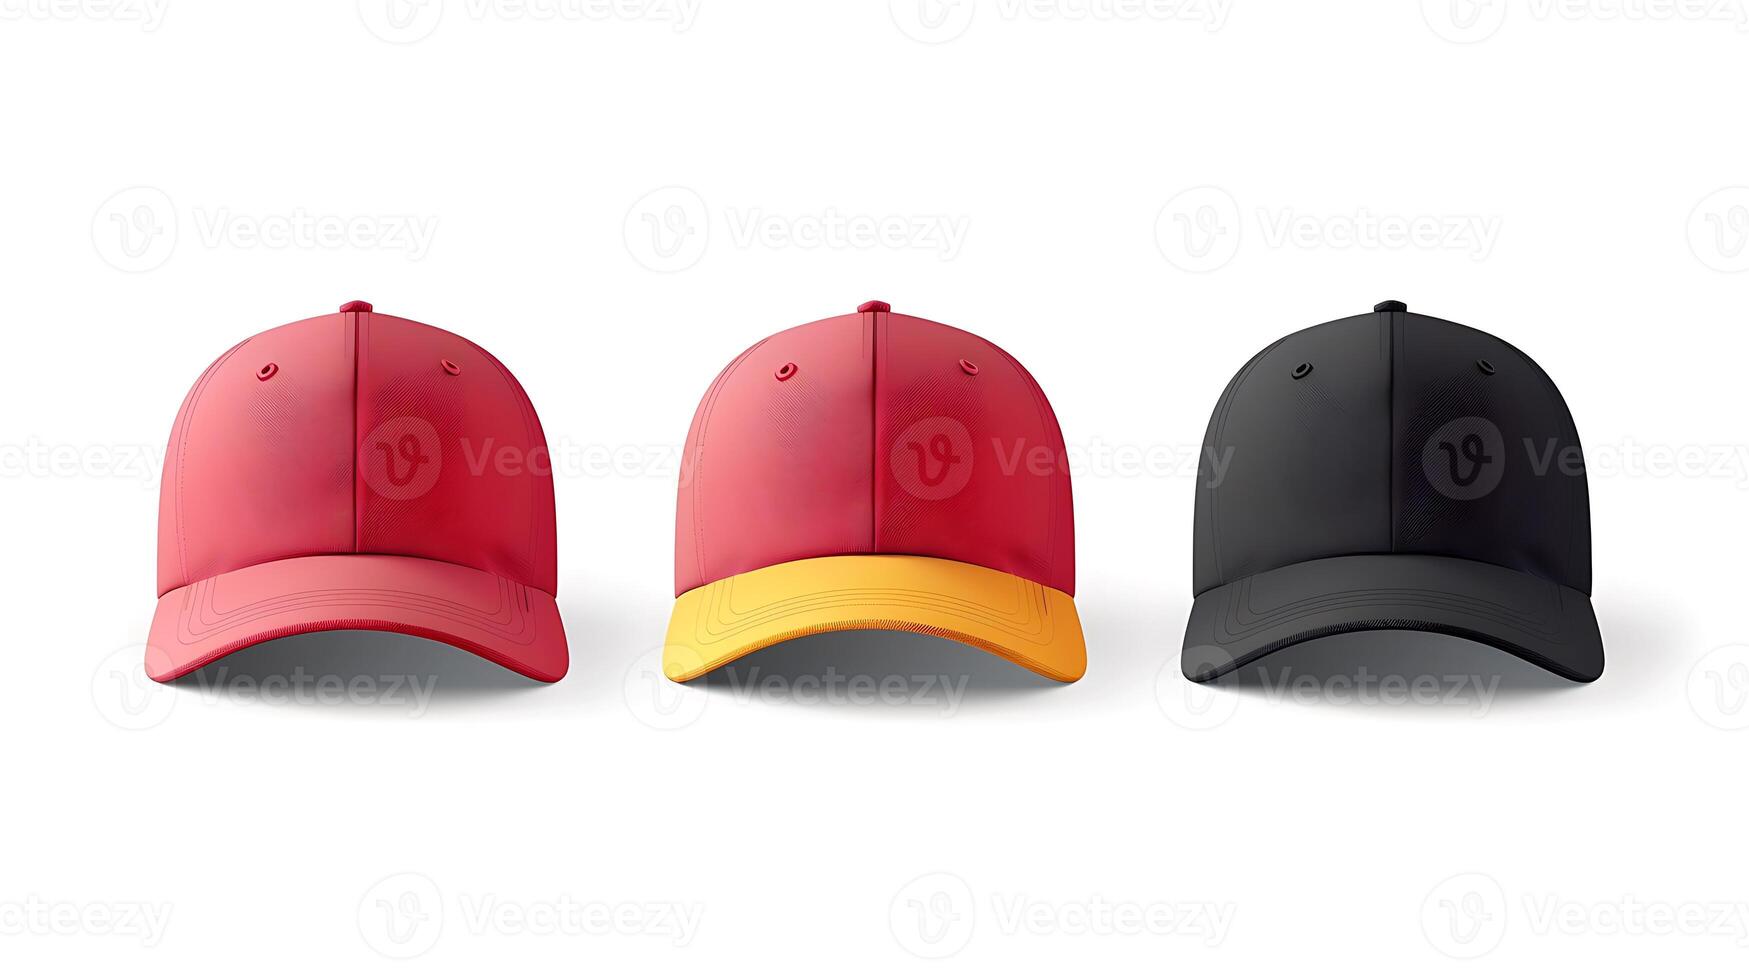 Realistic baseball cap front view mockup set with text logo template. photo